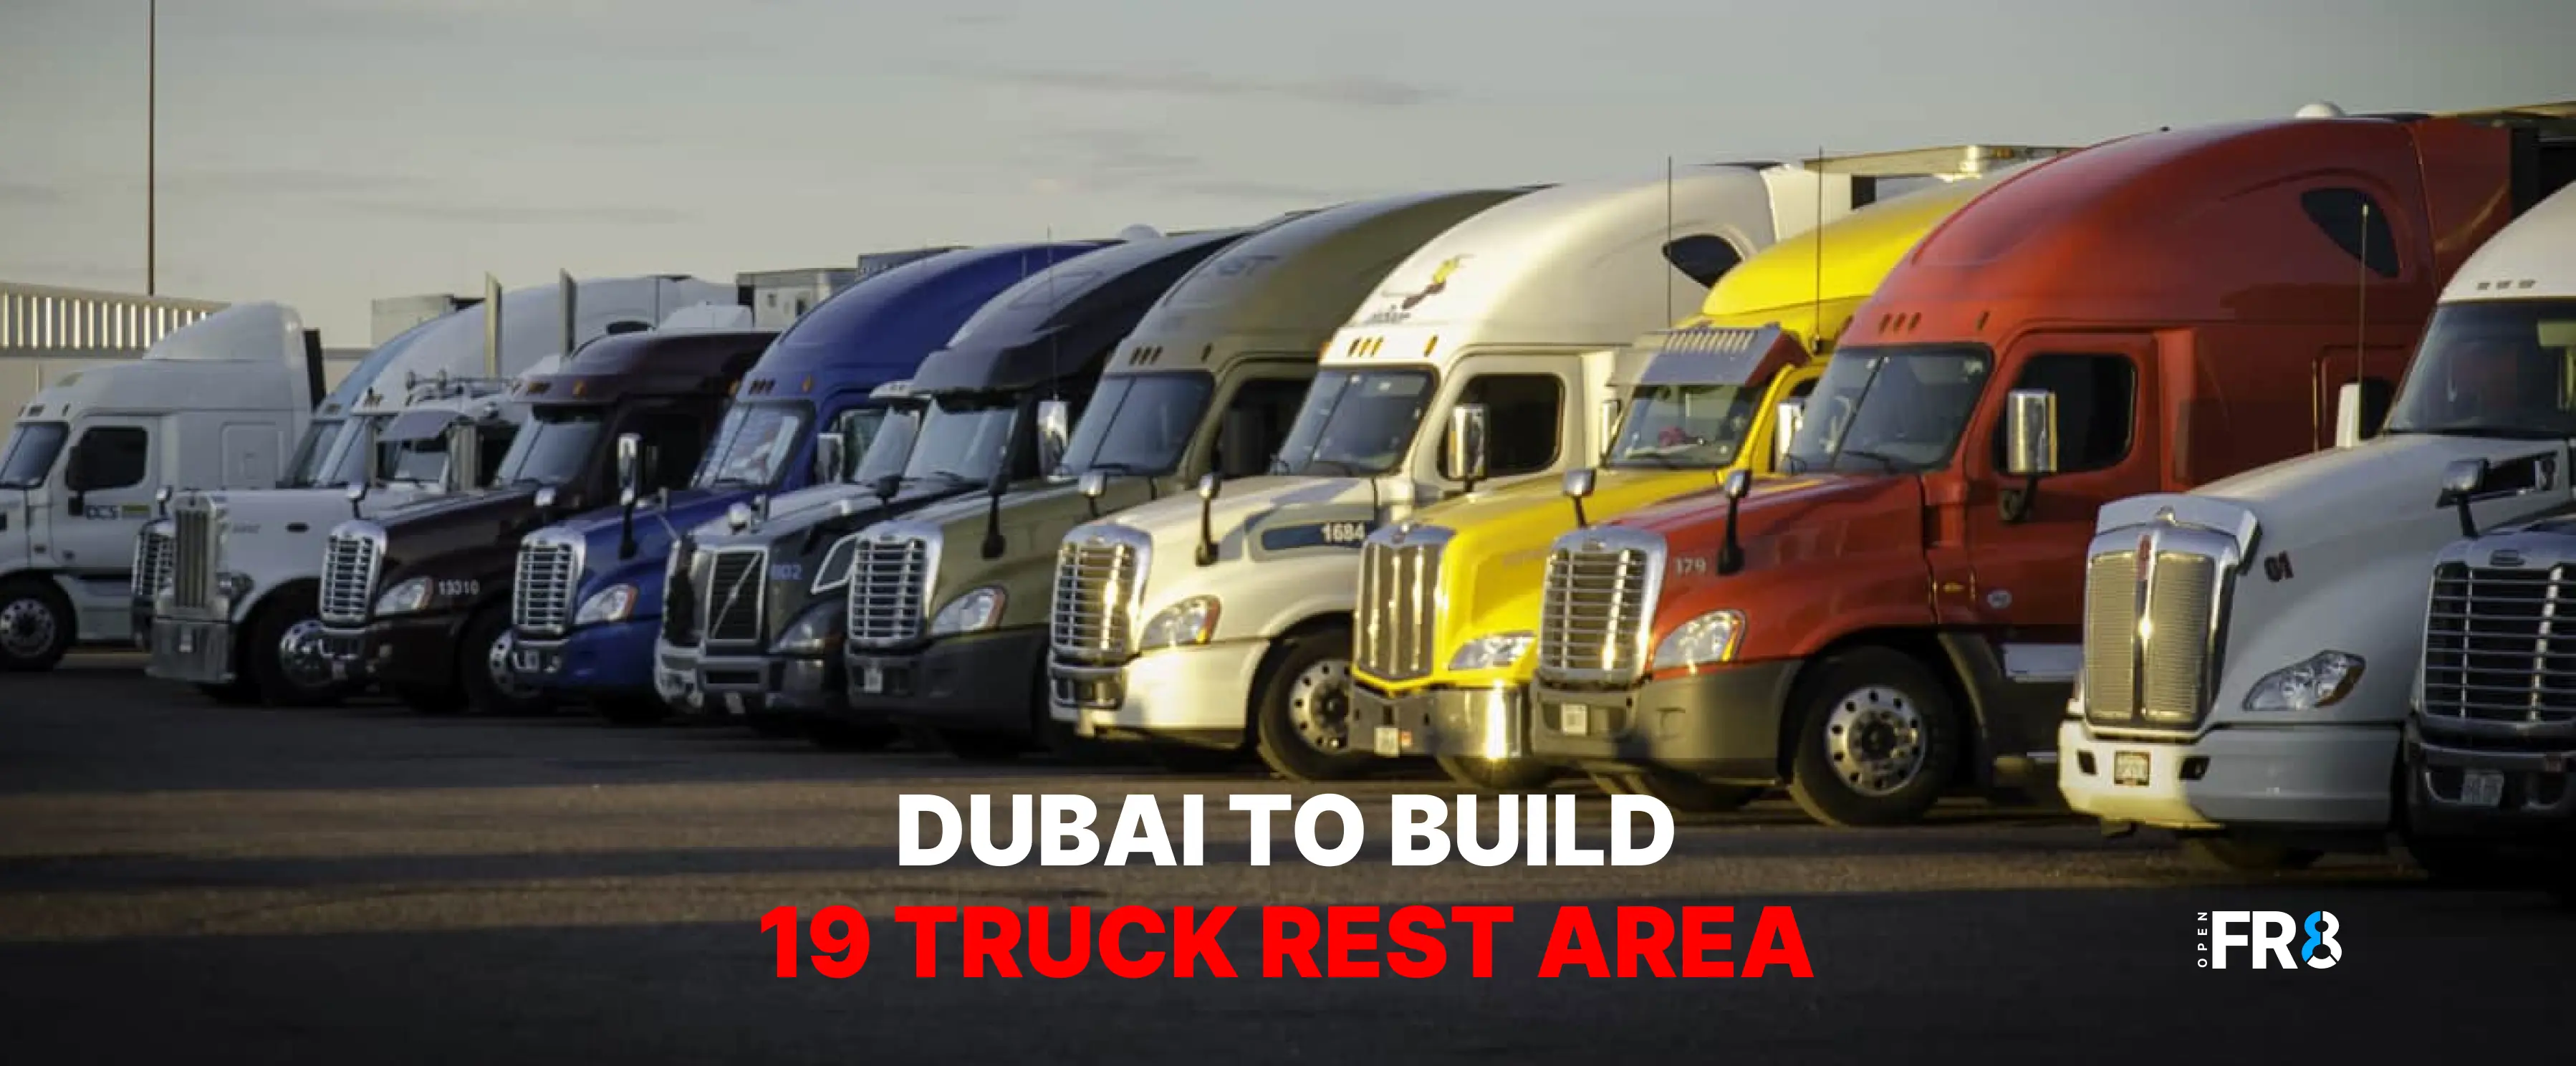 Dubai to Build 19 Truck Parking Stops and Lay-bys by 2025